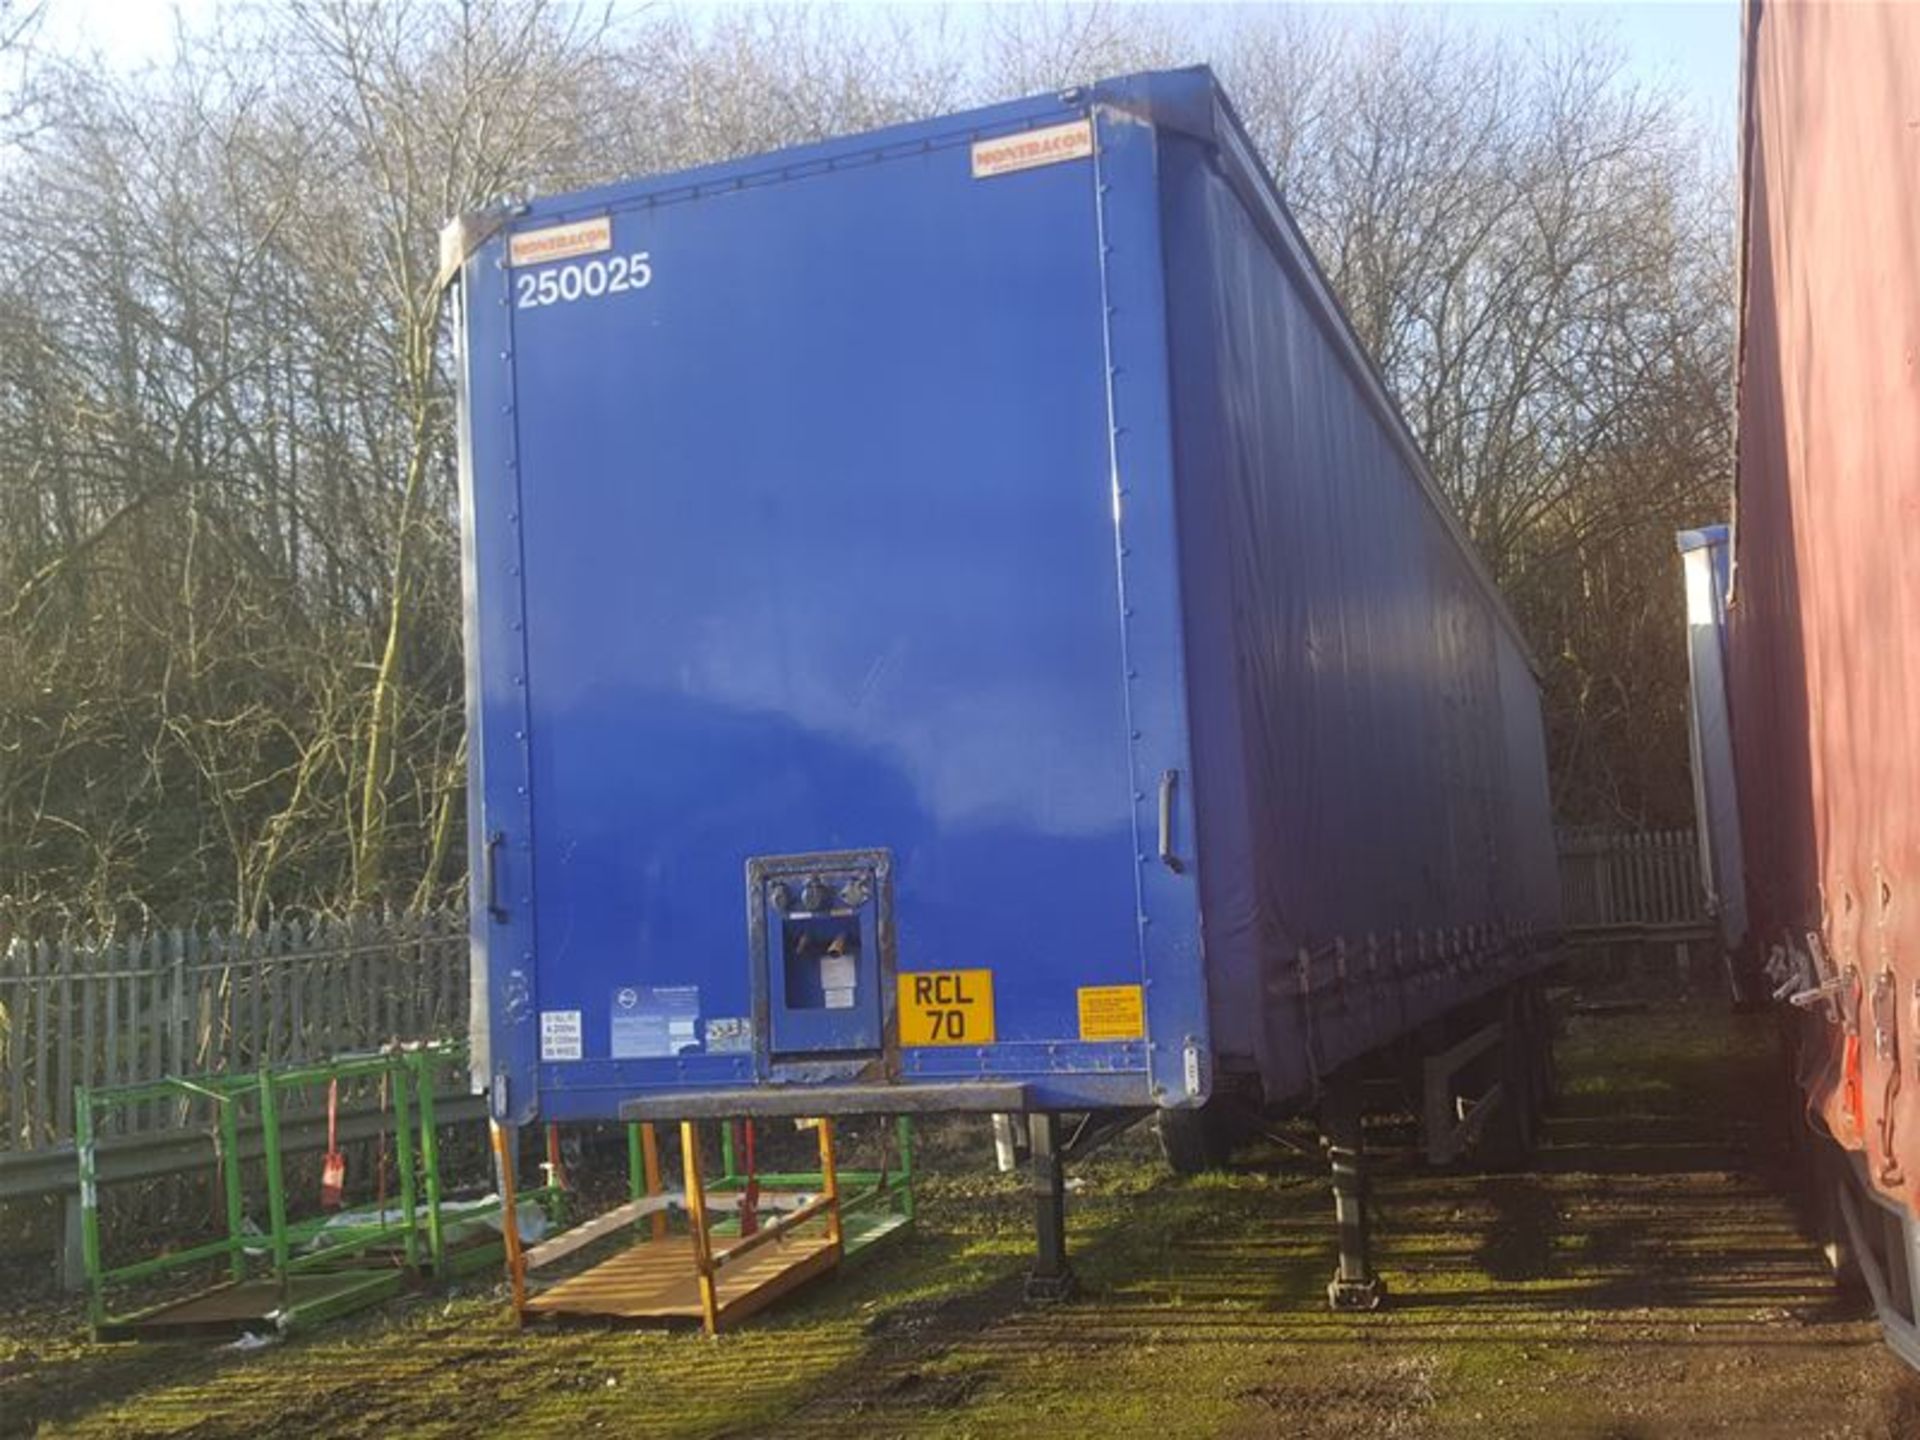 2004 Montracon 4.2 Curtainside Trailer with Taillift - Image 2 of 8